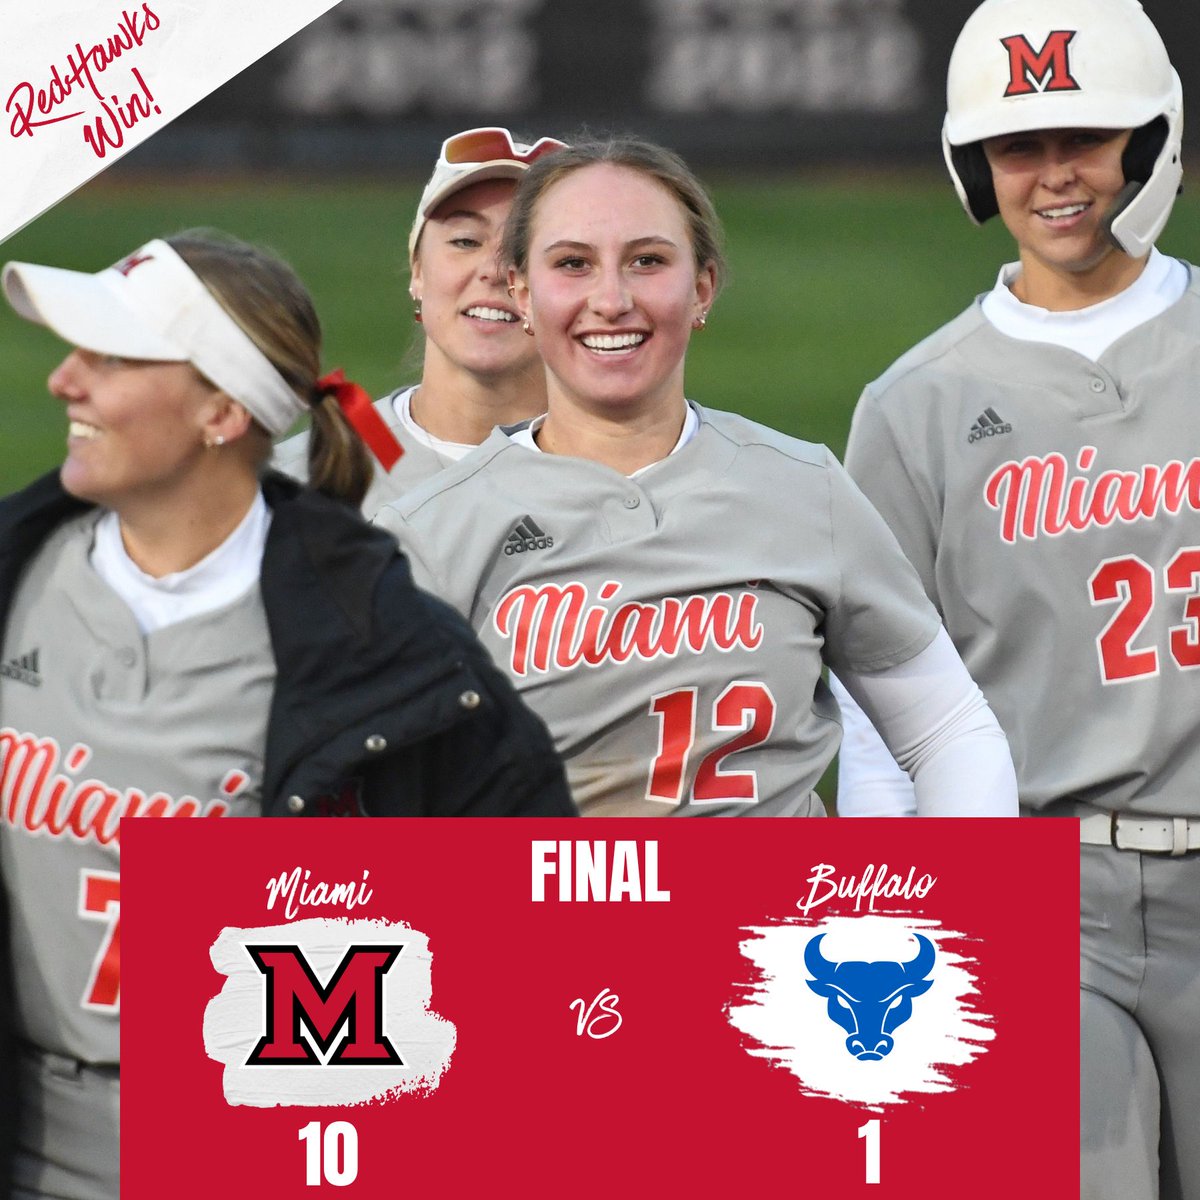 The RedHawks take the first game of the series against Buffalo! 🔴 6 of 12 of the RedHawks’ hits were for extra bases. 🔴 Cummins, Golembiewski, and Spaid all had homers. 🔴 Madilyn Reeves got the win. She allowed just two hits and struck out four. #RiseUpRedHawks